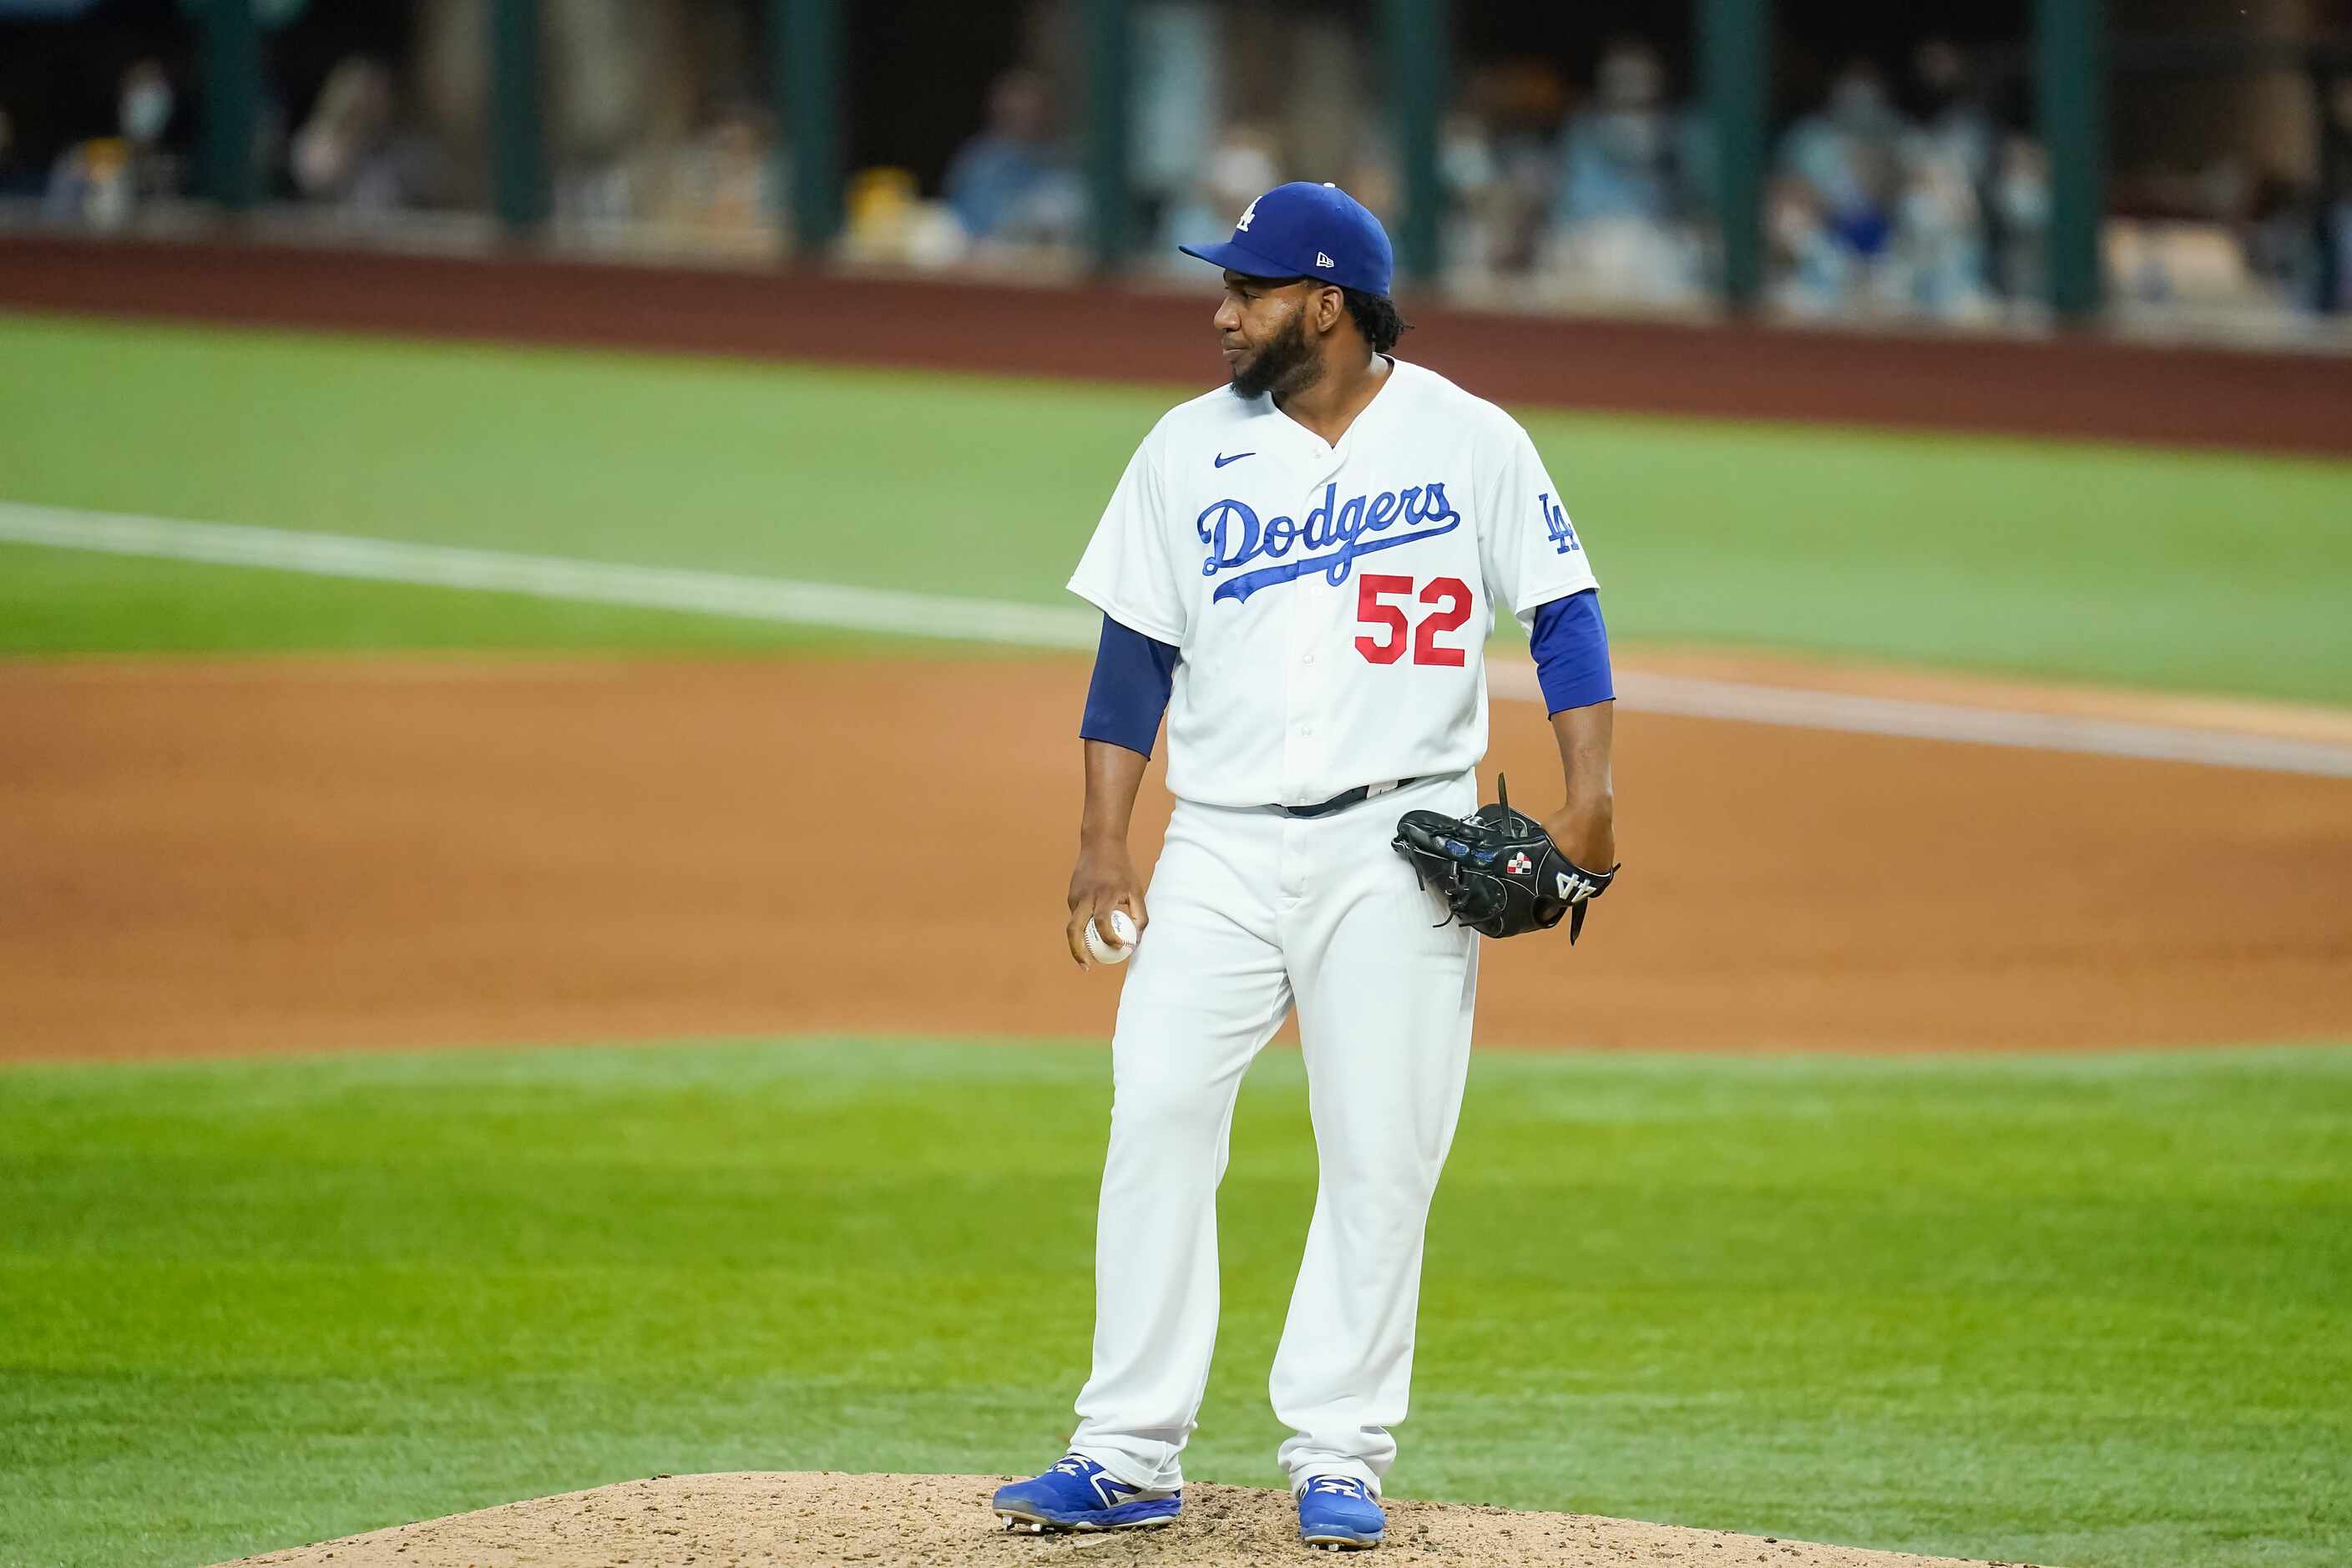 Los Angeles Dodgers relief pitcher Pedro Baez reacts after issuing a walk to load the bases...